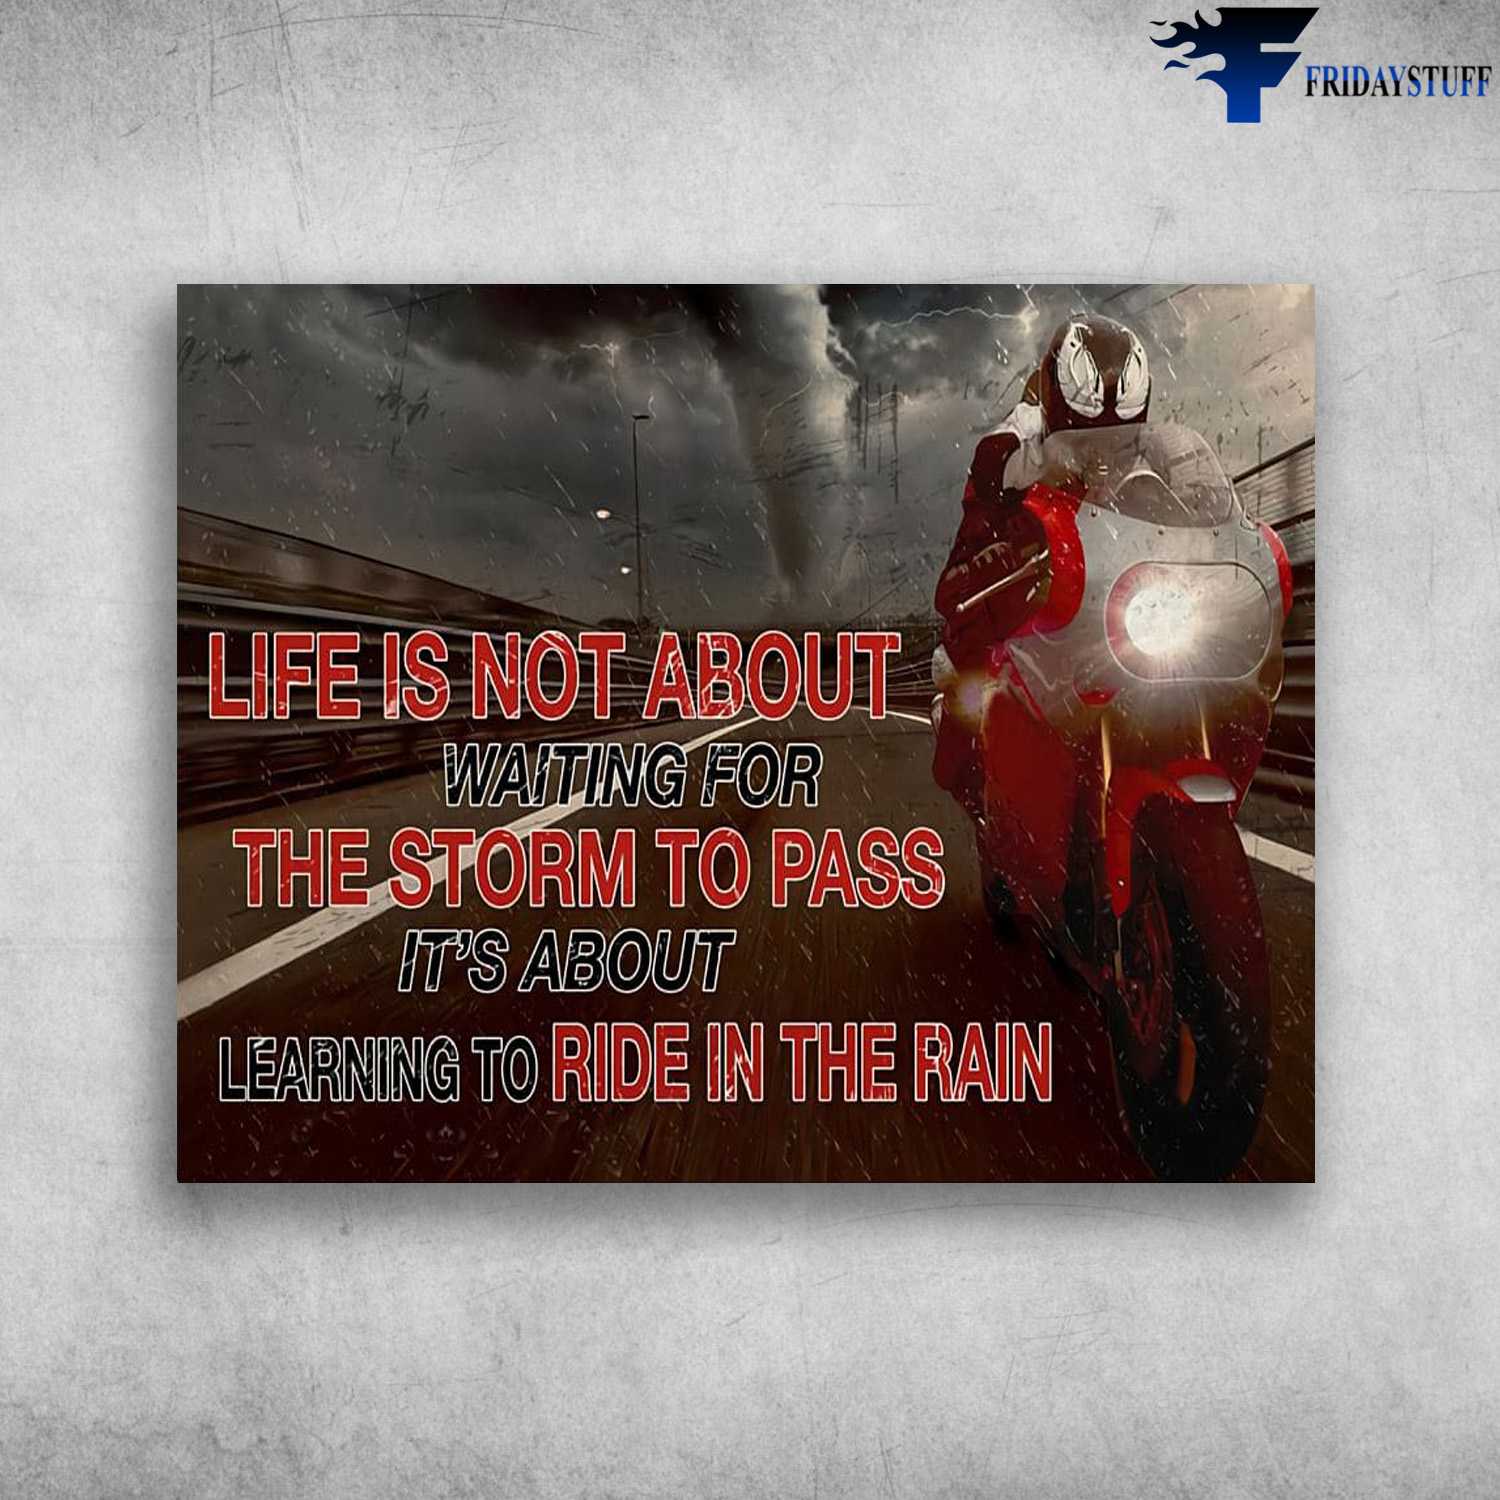 Rider Poster, Biker Gift, Life Is Not About Waiting For, The Storm To Pass, It's About Learning To Ride In The Rain